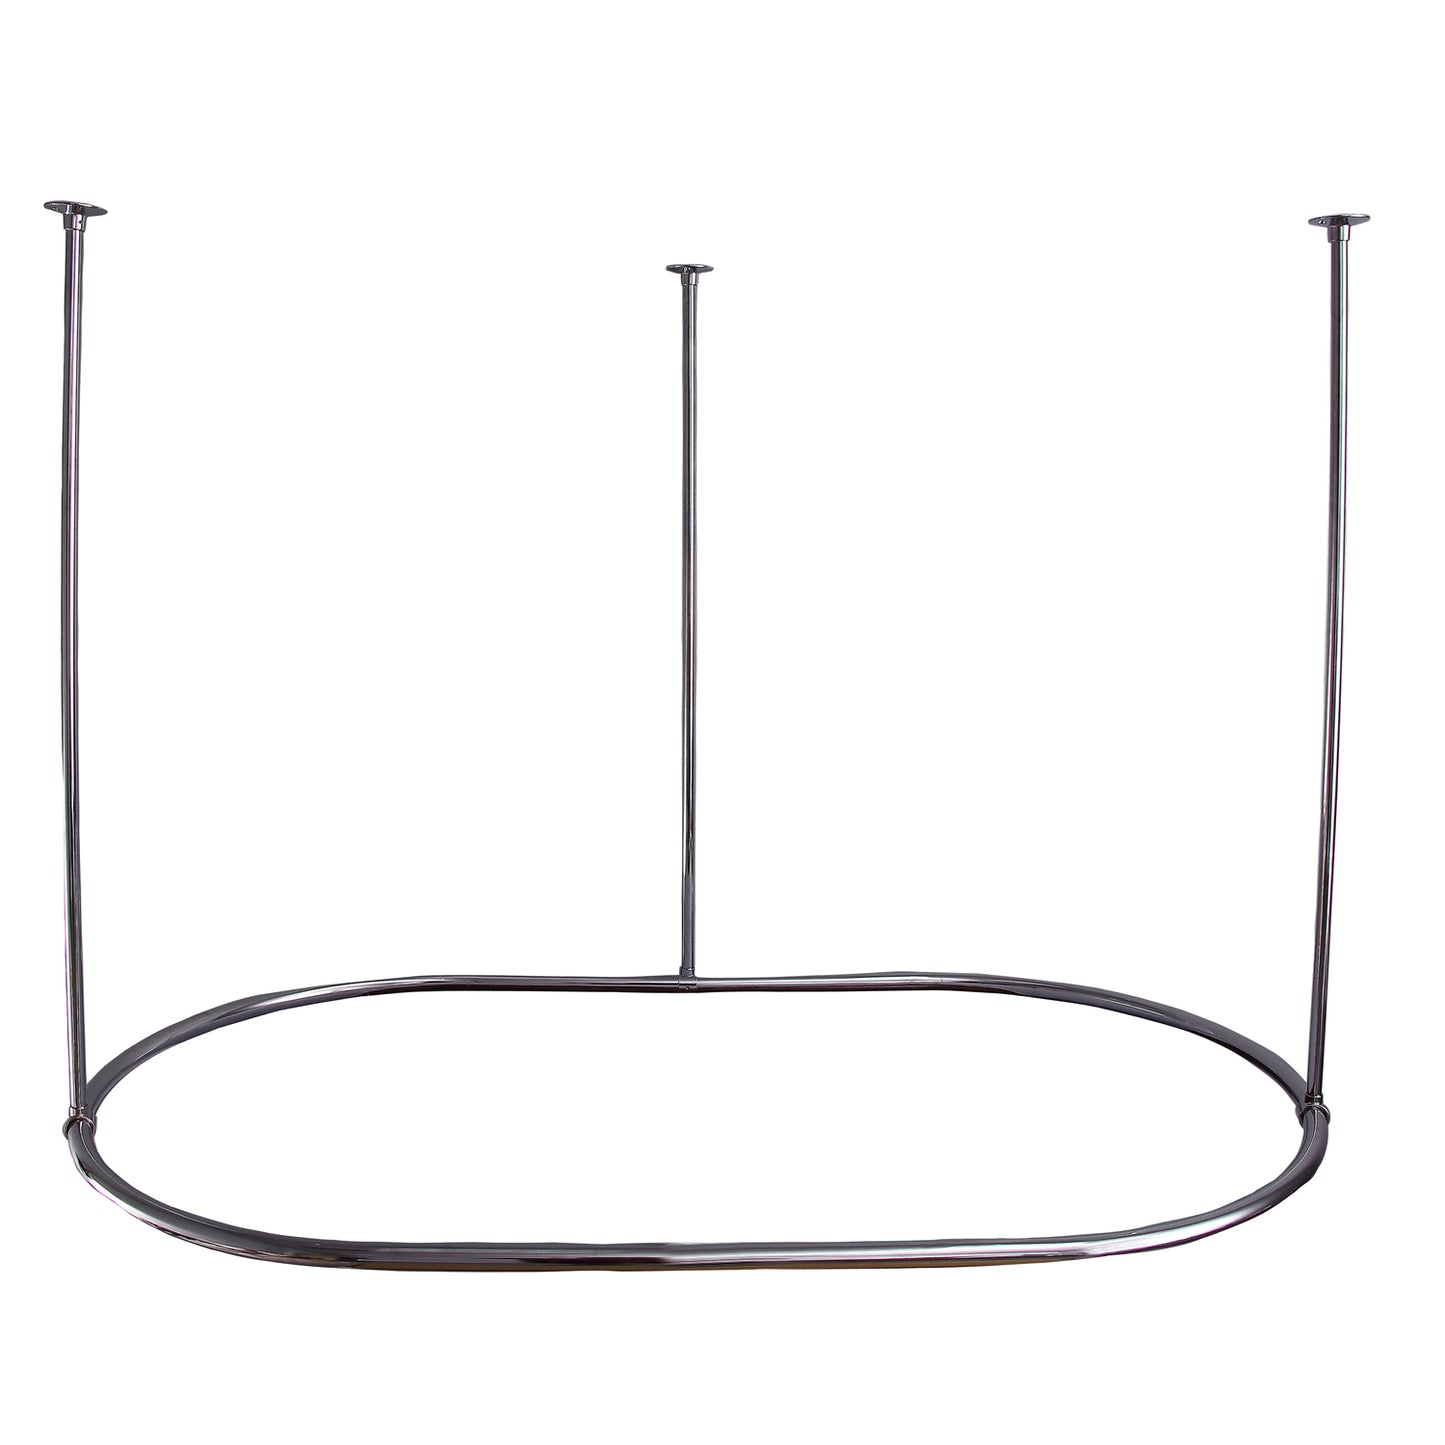 48" x 36" Oval Shower Curtain Ring in Chrome